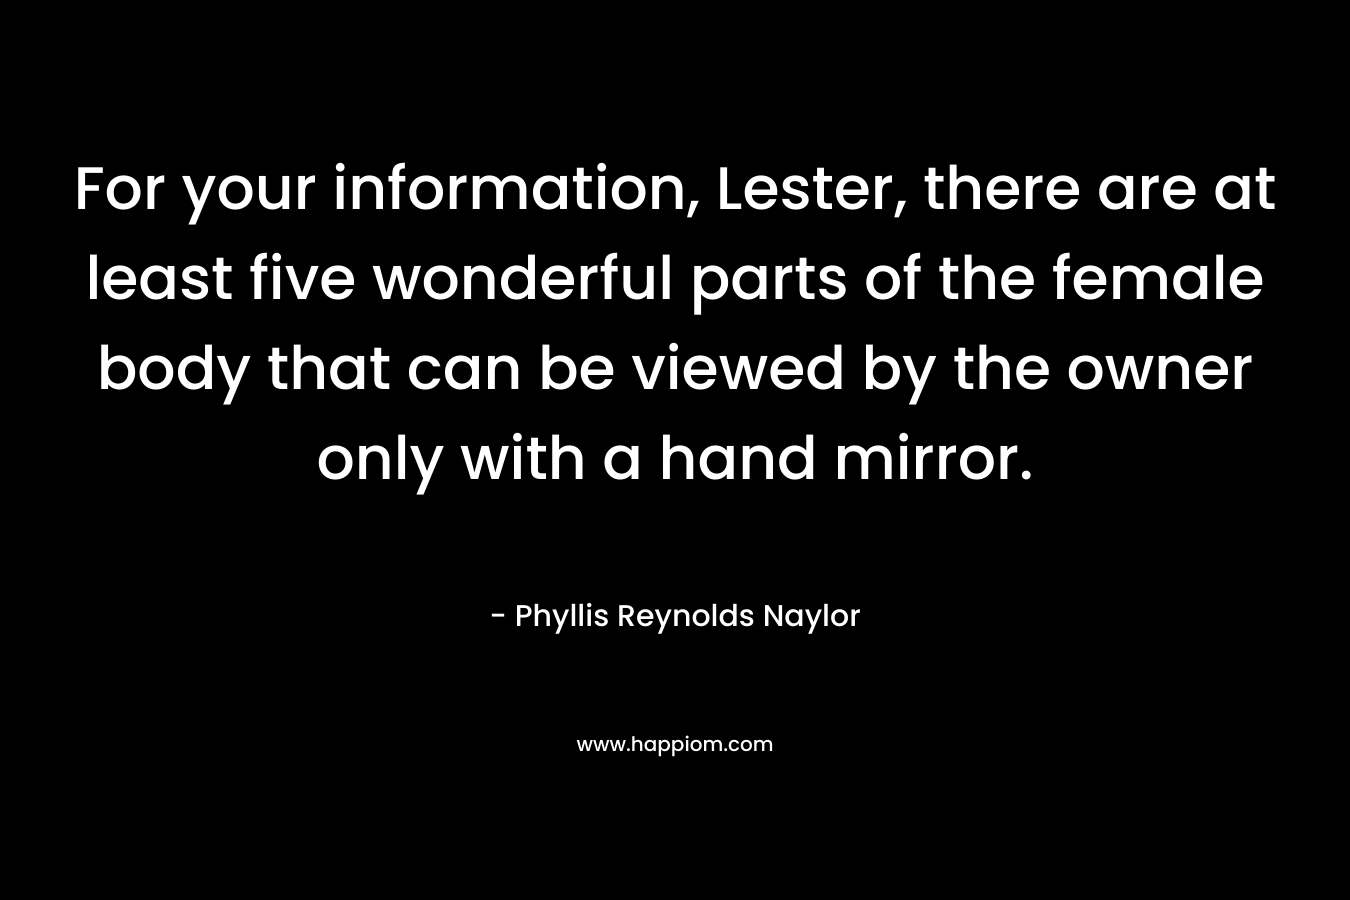 For your information, Lester, there are at least five wonderful parts of the female body that can be viewed by the owner only with a hand mirror.